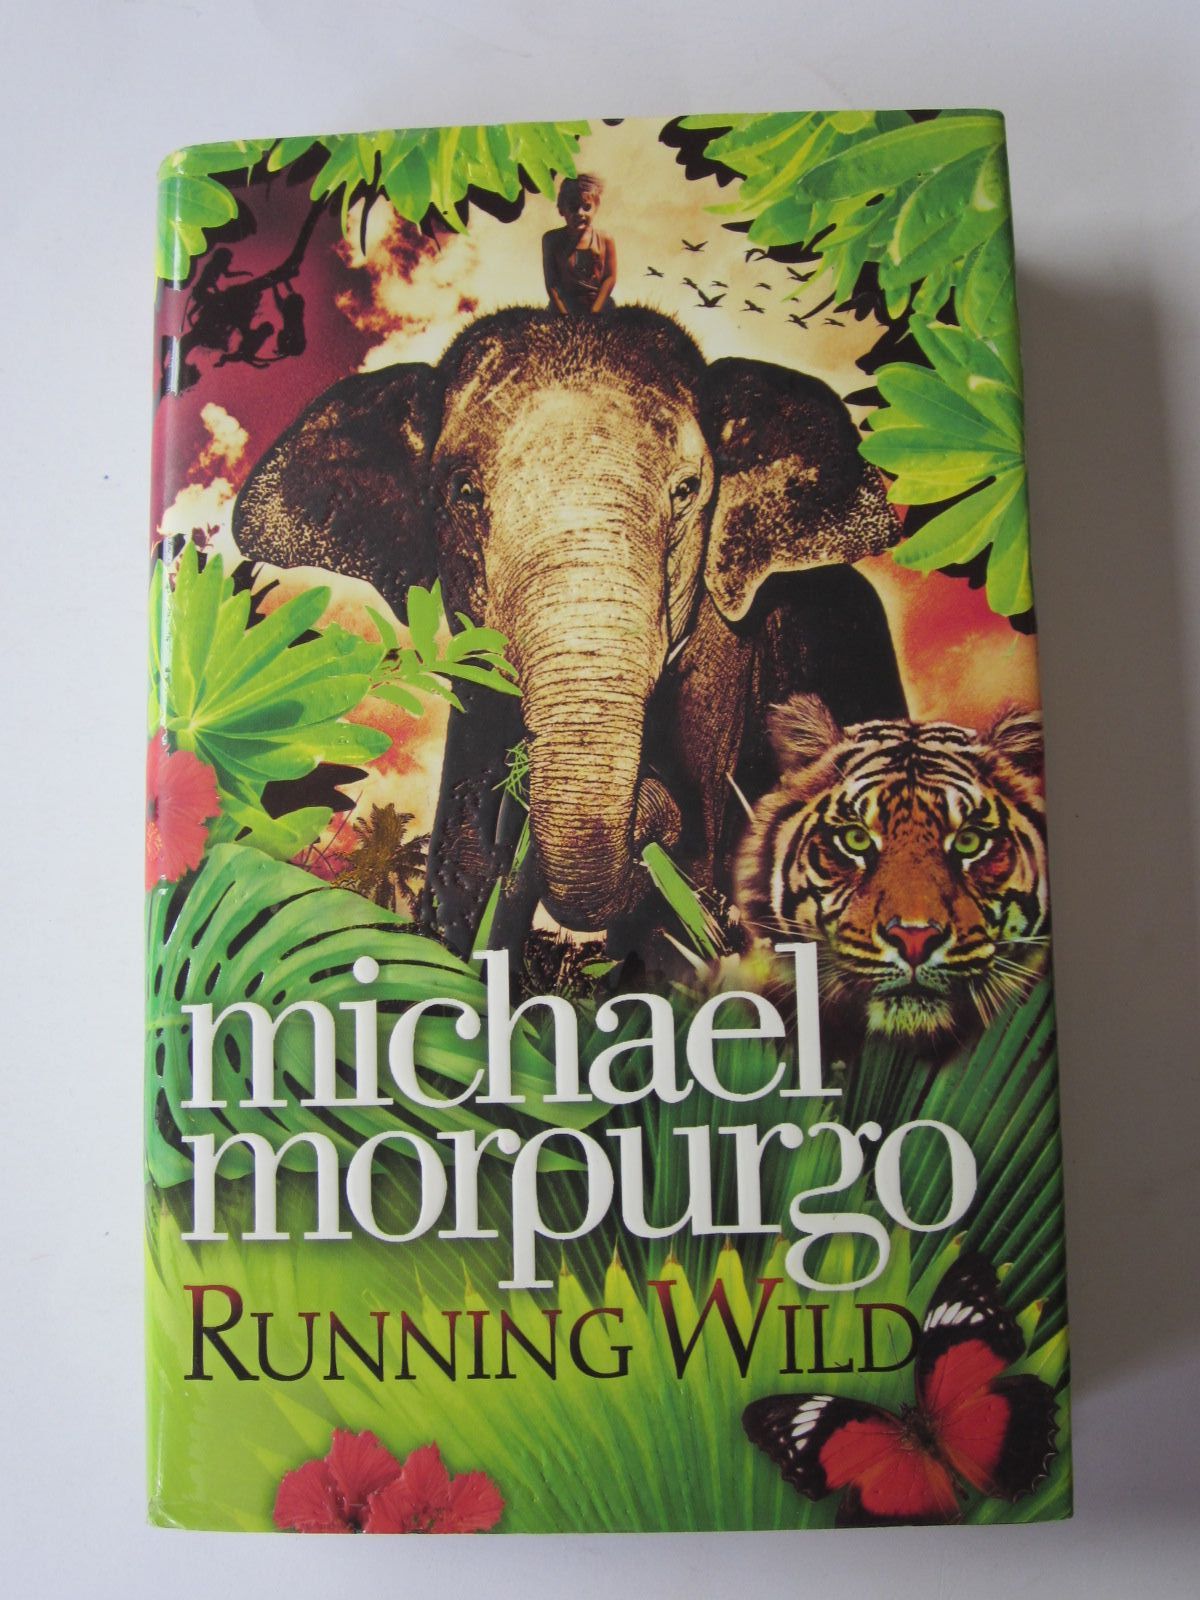 Photo of RUNNING WILD written by Morpurgo, Michael illustrated by Young, Sarah published by Harper Collins Childrens Books (STOCK CODE: 1401261)  for sale by Stella & Rose's Books